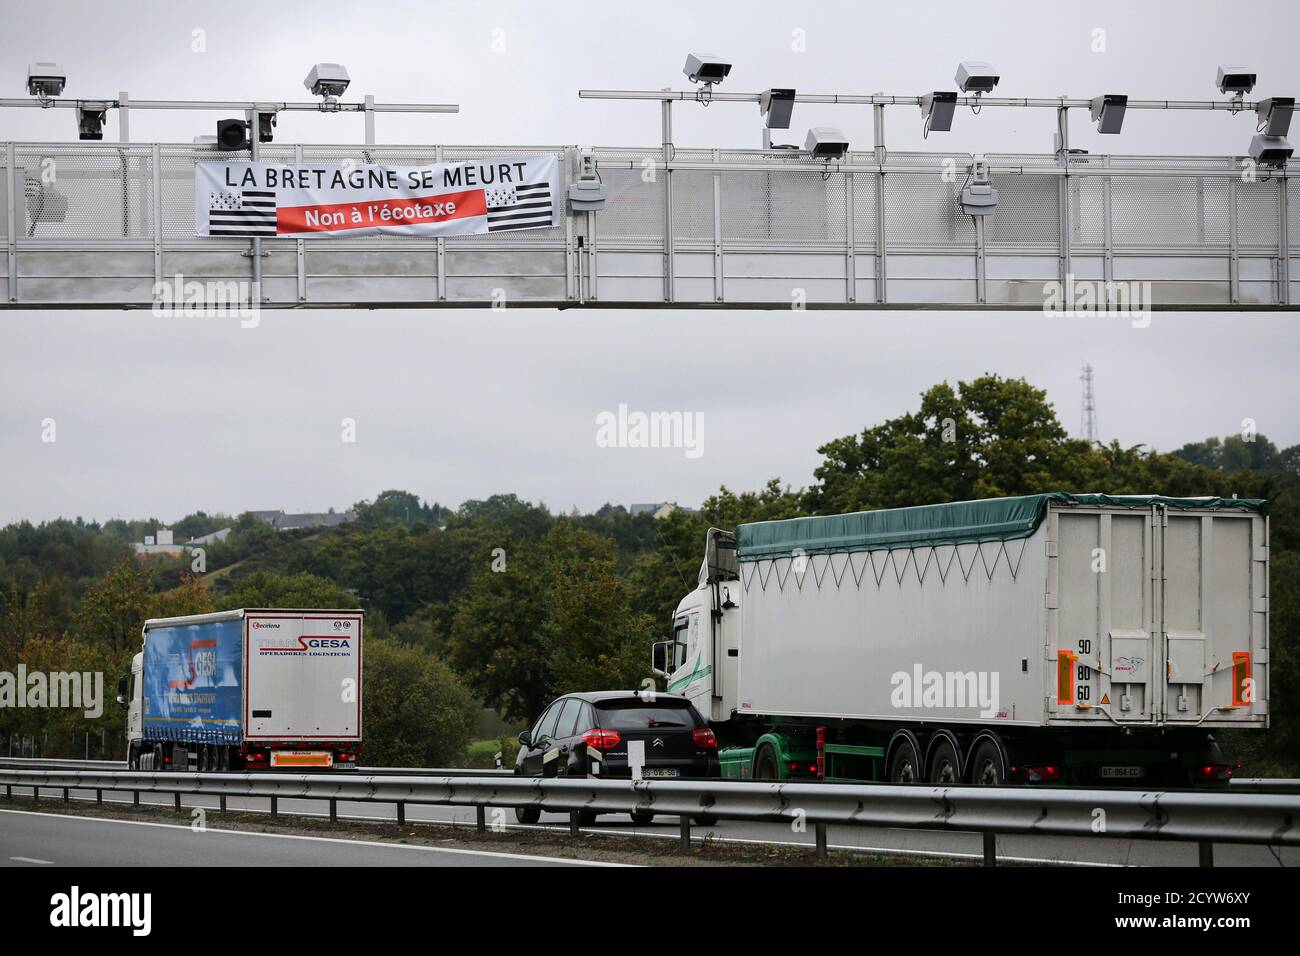 Cars and truck passes under an ecotax control portal in Bain-de-Bretagne, western France, October 15, 2013. French farmers protest the future tax on truck transport of their produce. The banner reads 'Brittany is dying, No ecotaxe'.  Picture taken October 15, 2013    REUTERS/Stephane Mahe (FRANCE - Tags: BUSINESS POLITICS TRANSPORT AGRICULTURE) Stock Photo